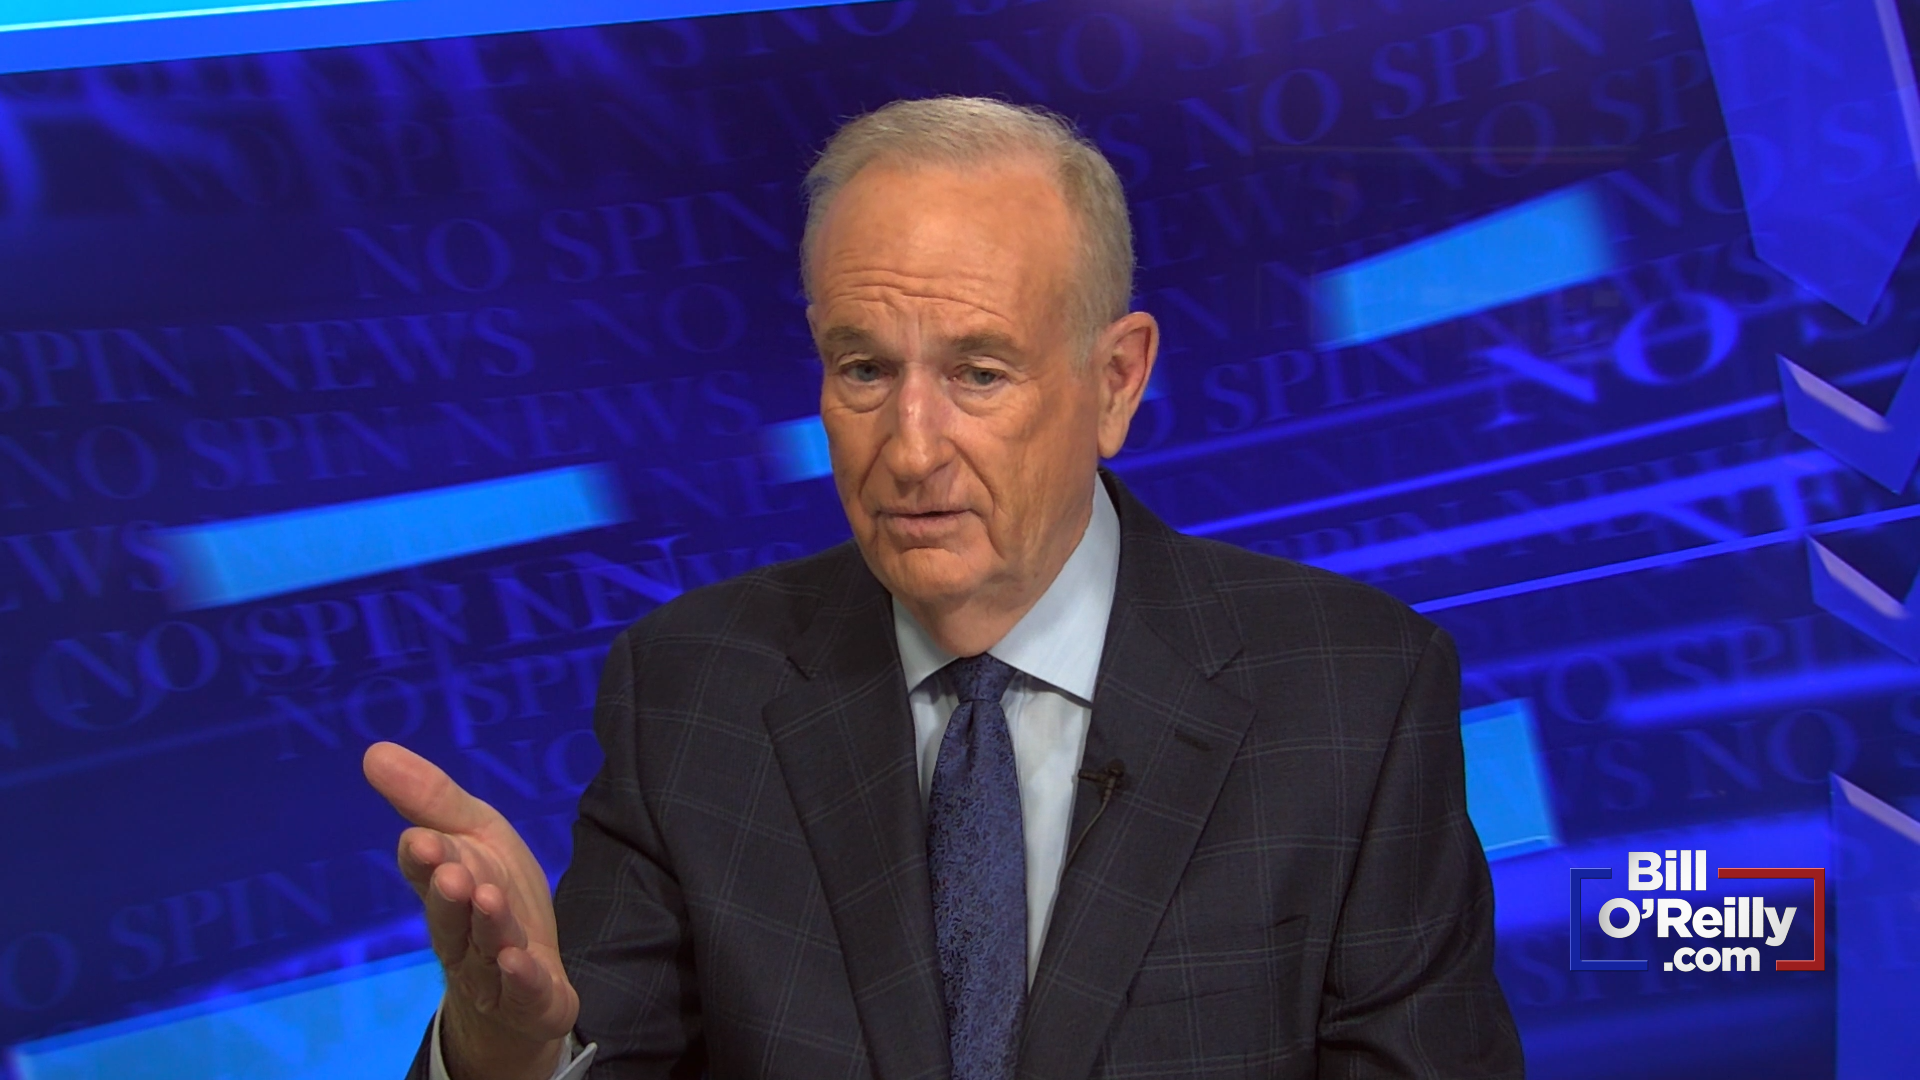 O'Reilly on the Economy: 'This Is A Mess!'